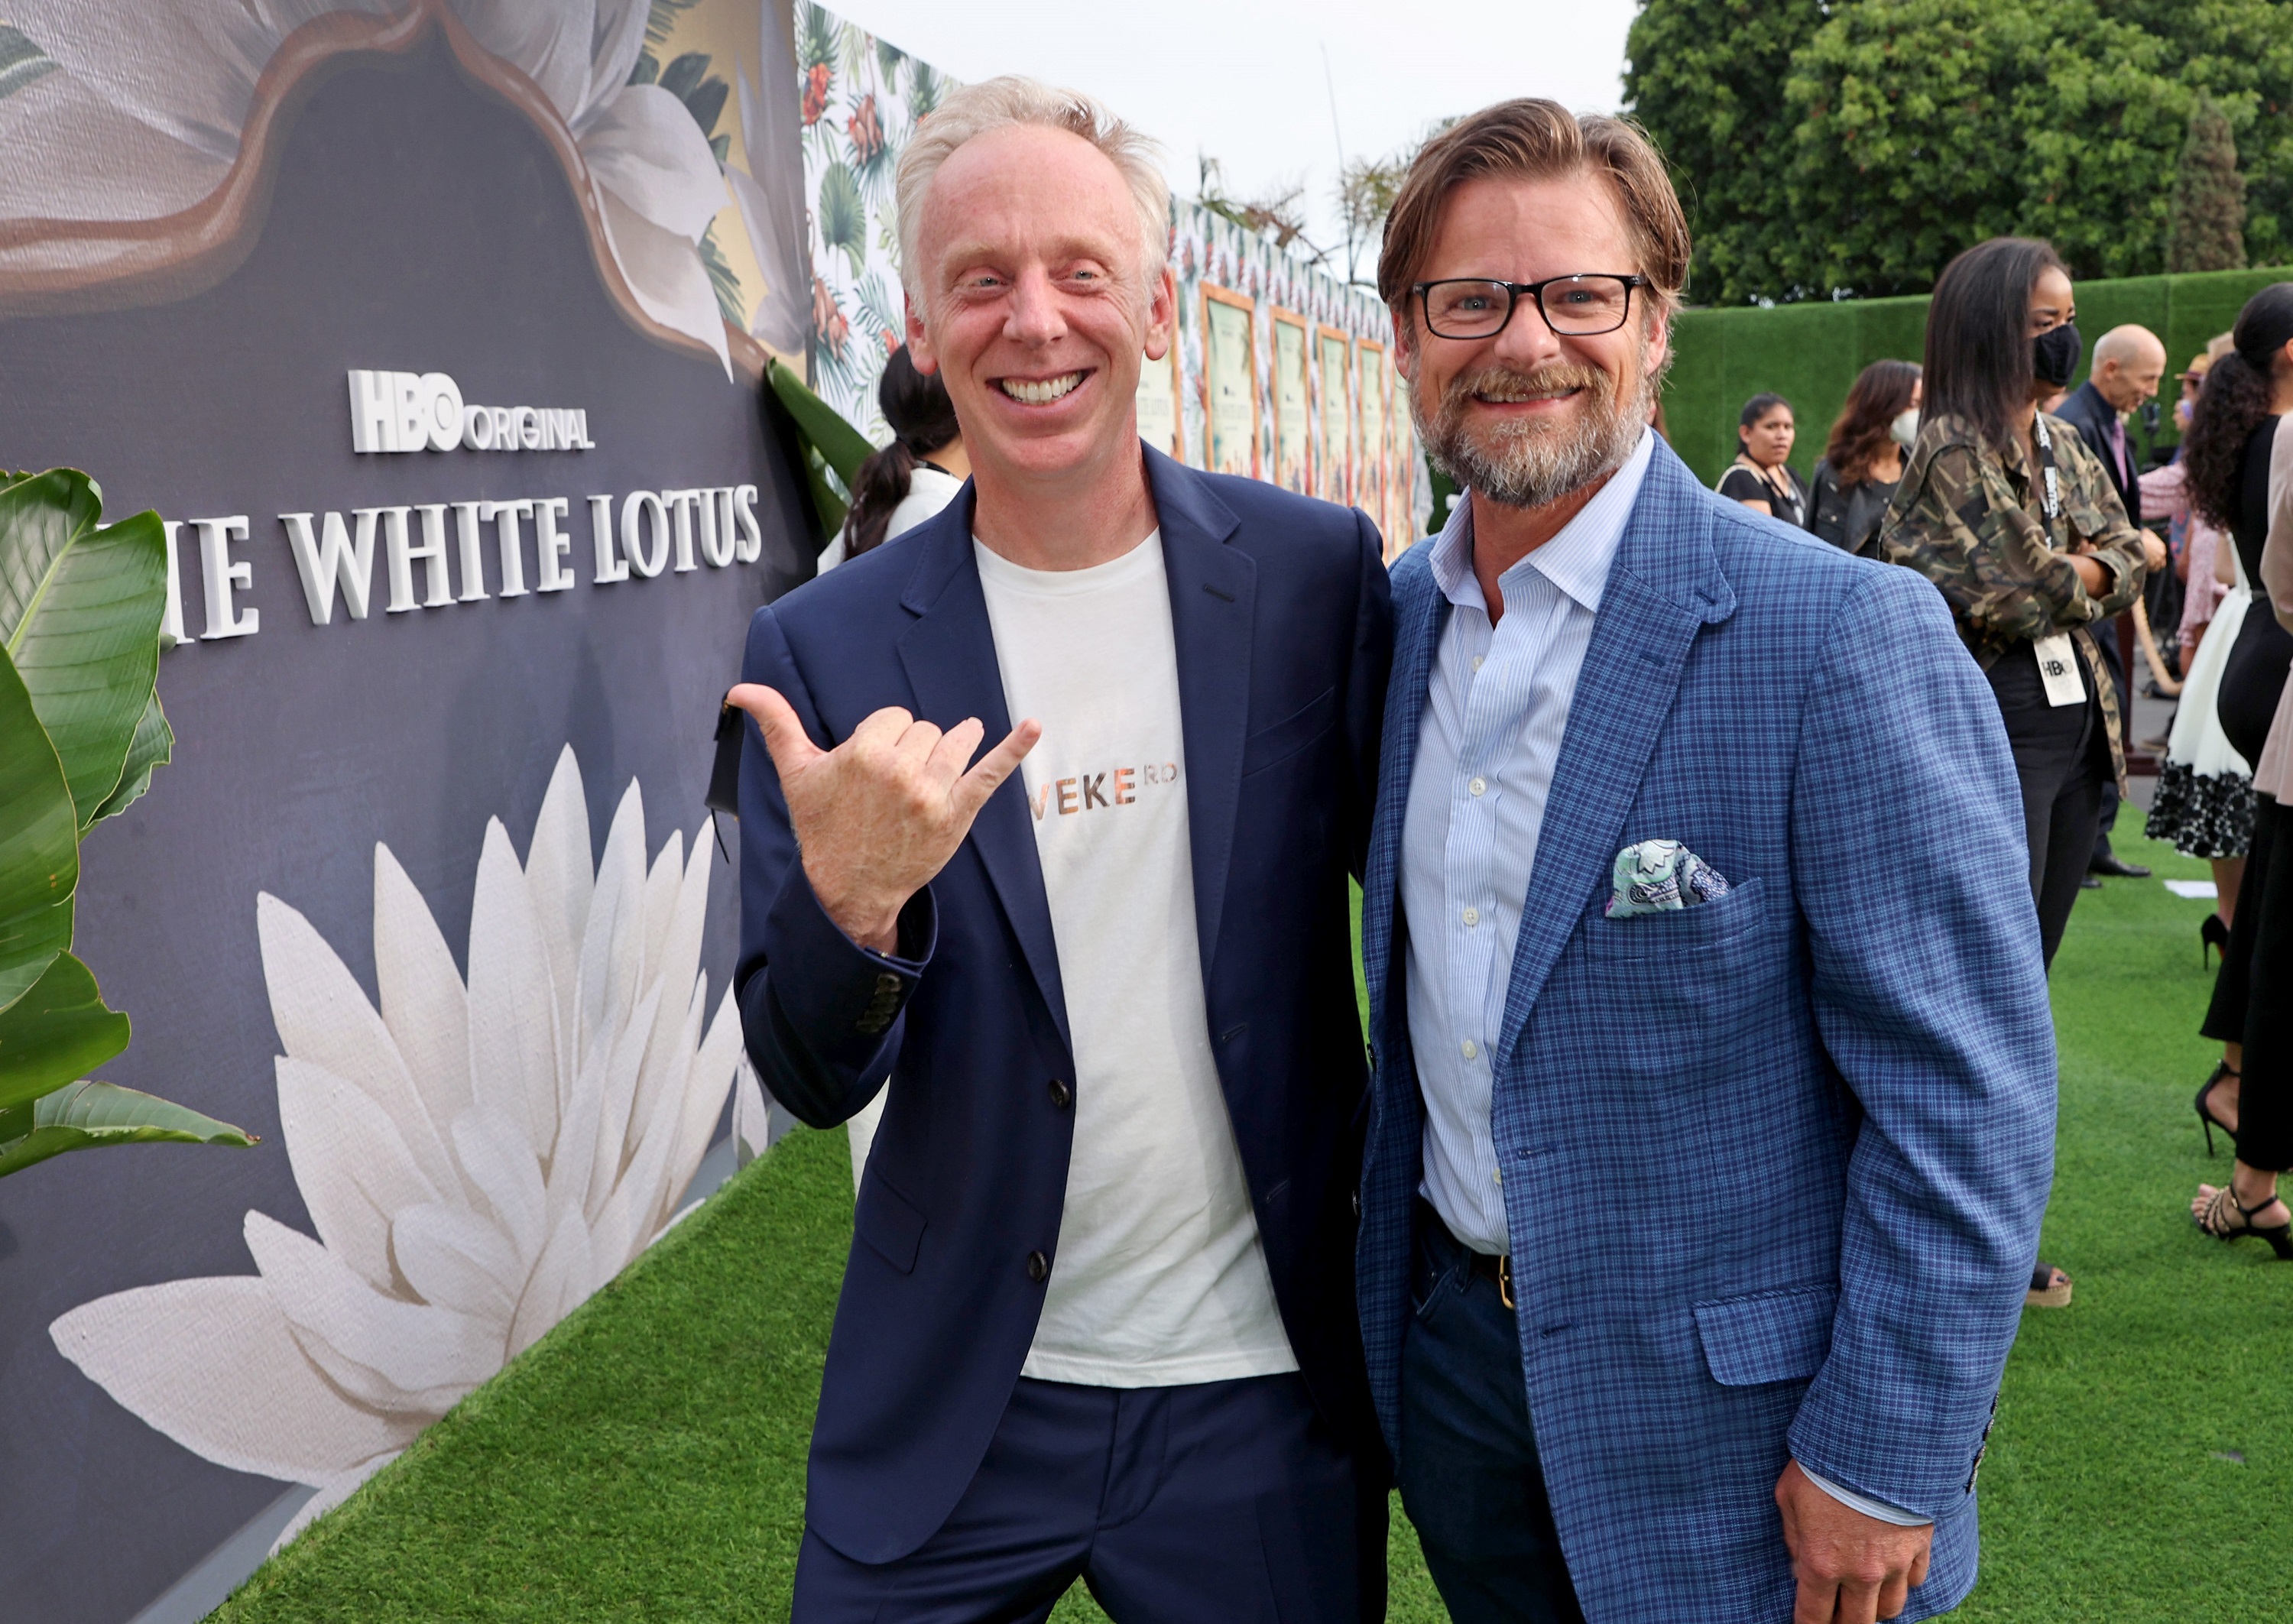 Director Mike White and actor Steve Zahn smiling for photographers at The White Lotus Season 1 premiere